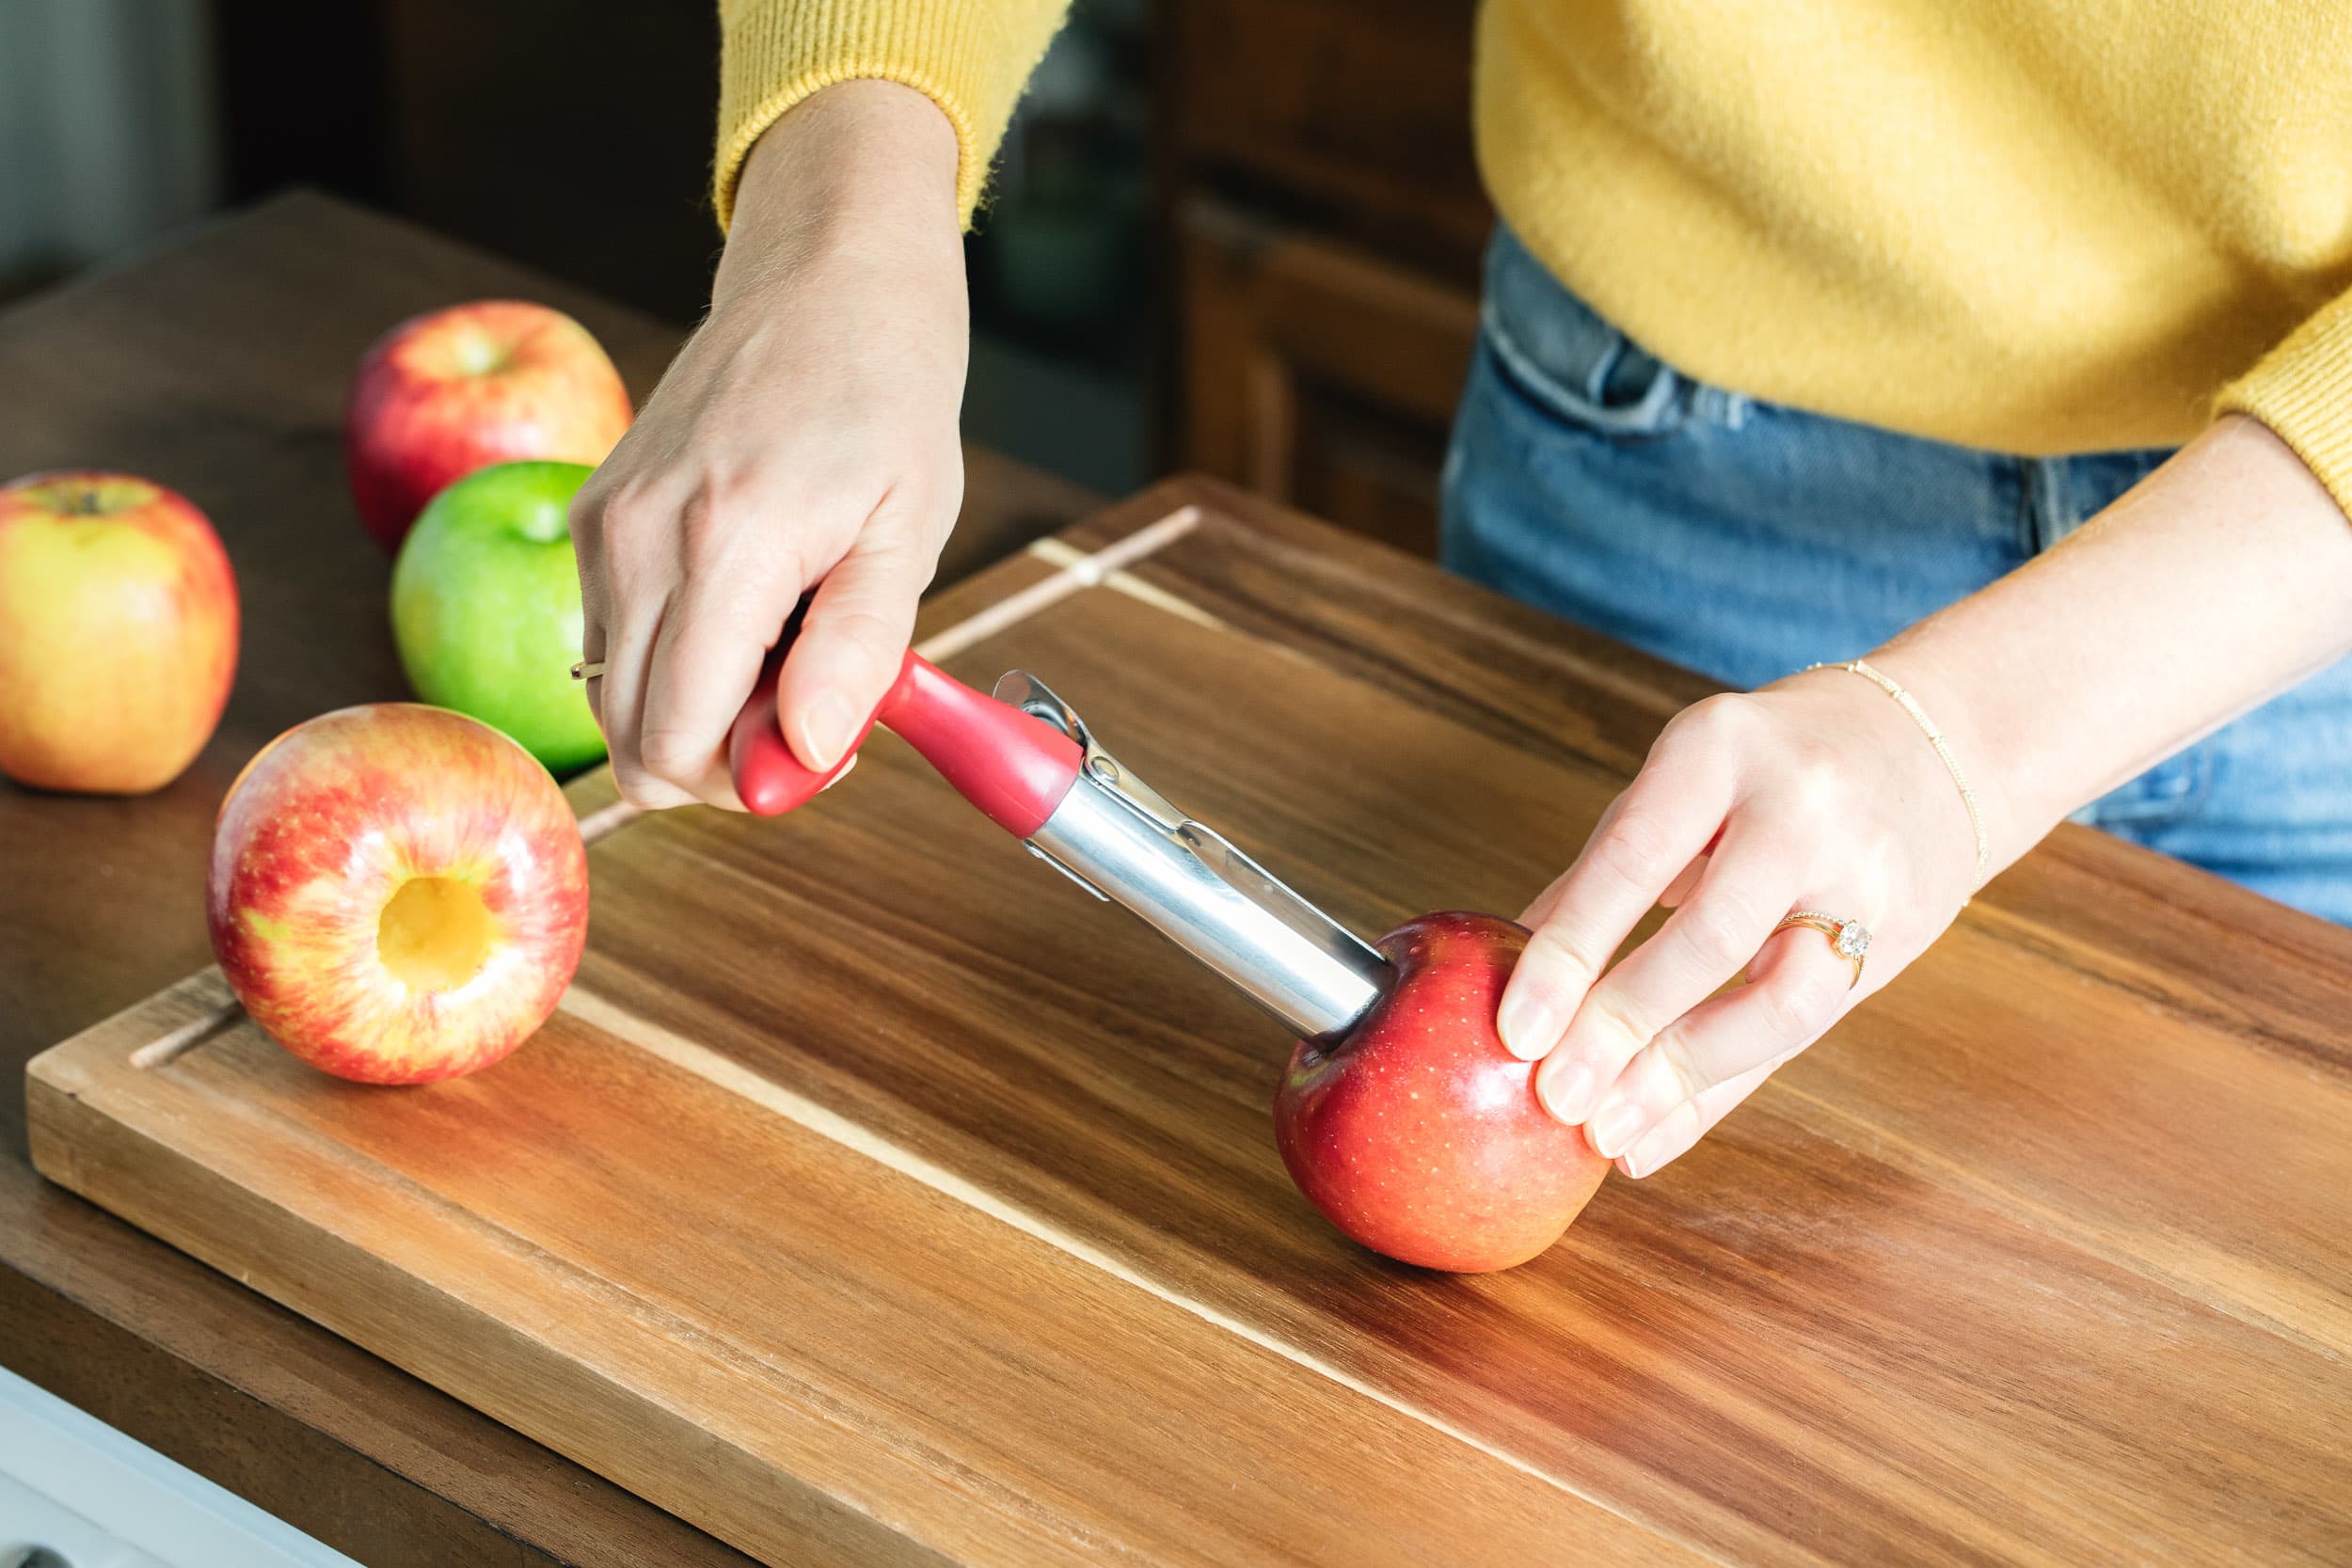 https://cdn.apartmenttherapy.info/image/upload/v1601751347/k/Photo/Lifestyle/2020-10-TK-Apple-Corer-And-this-Was-The-Best%20/2020-kitchn-best-apple-corer.jpg